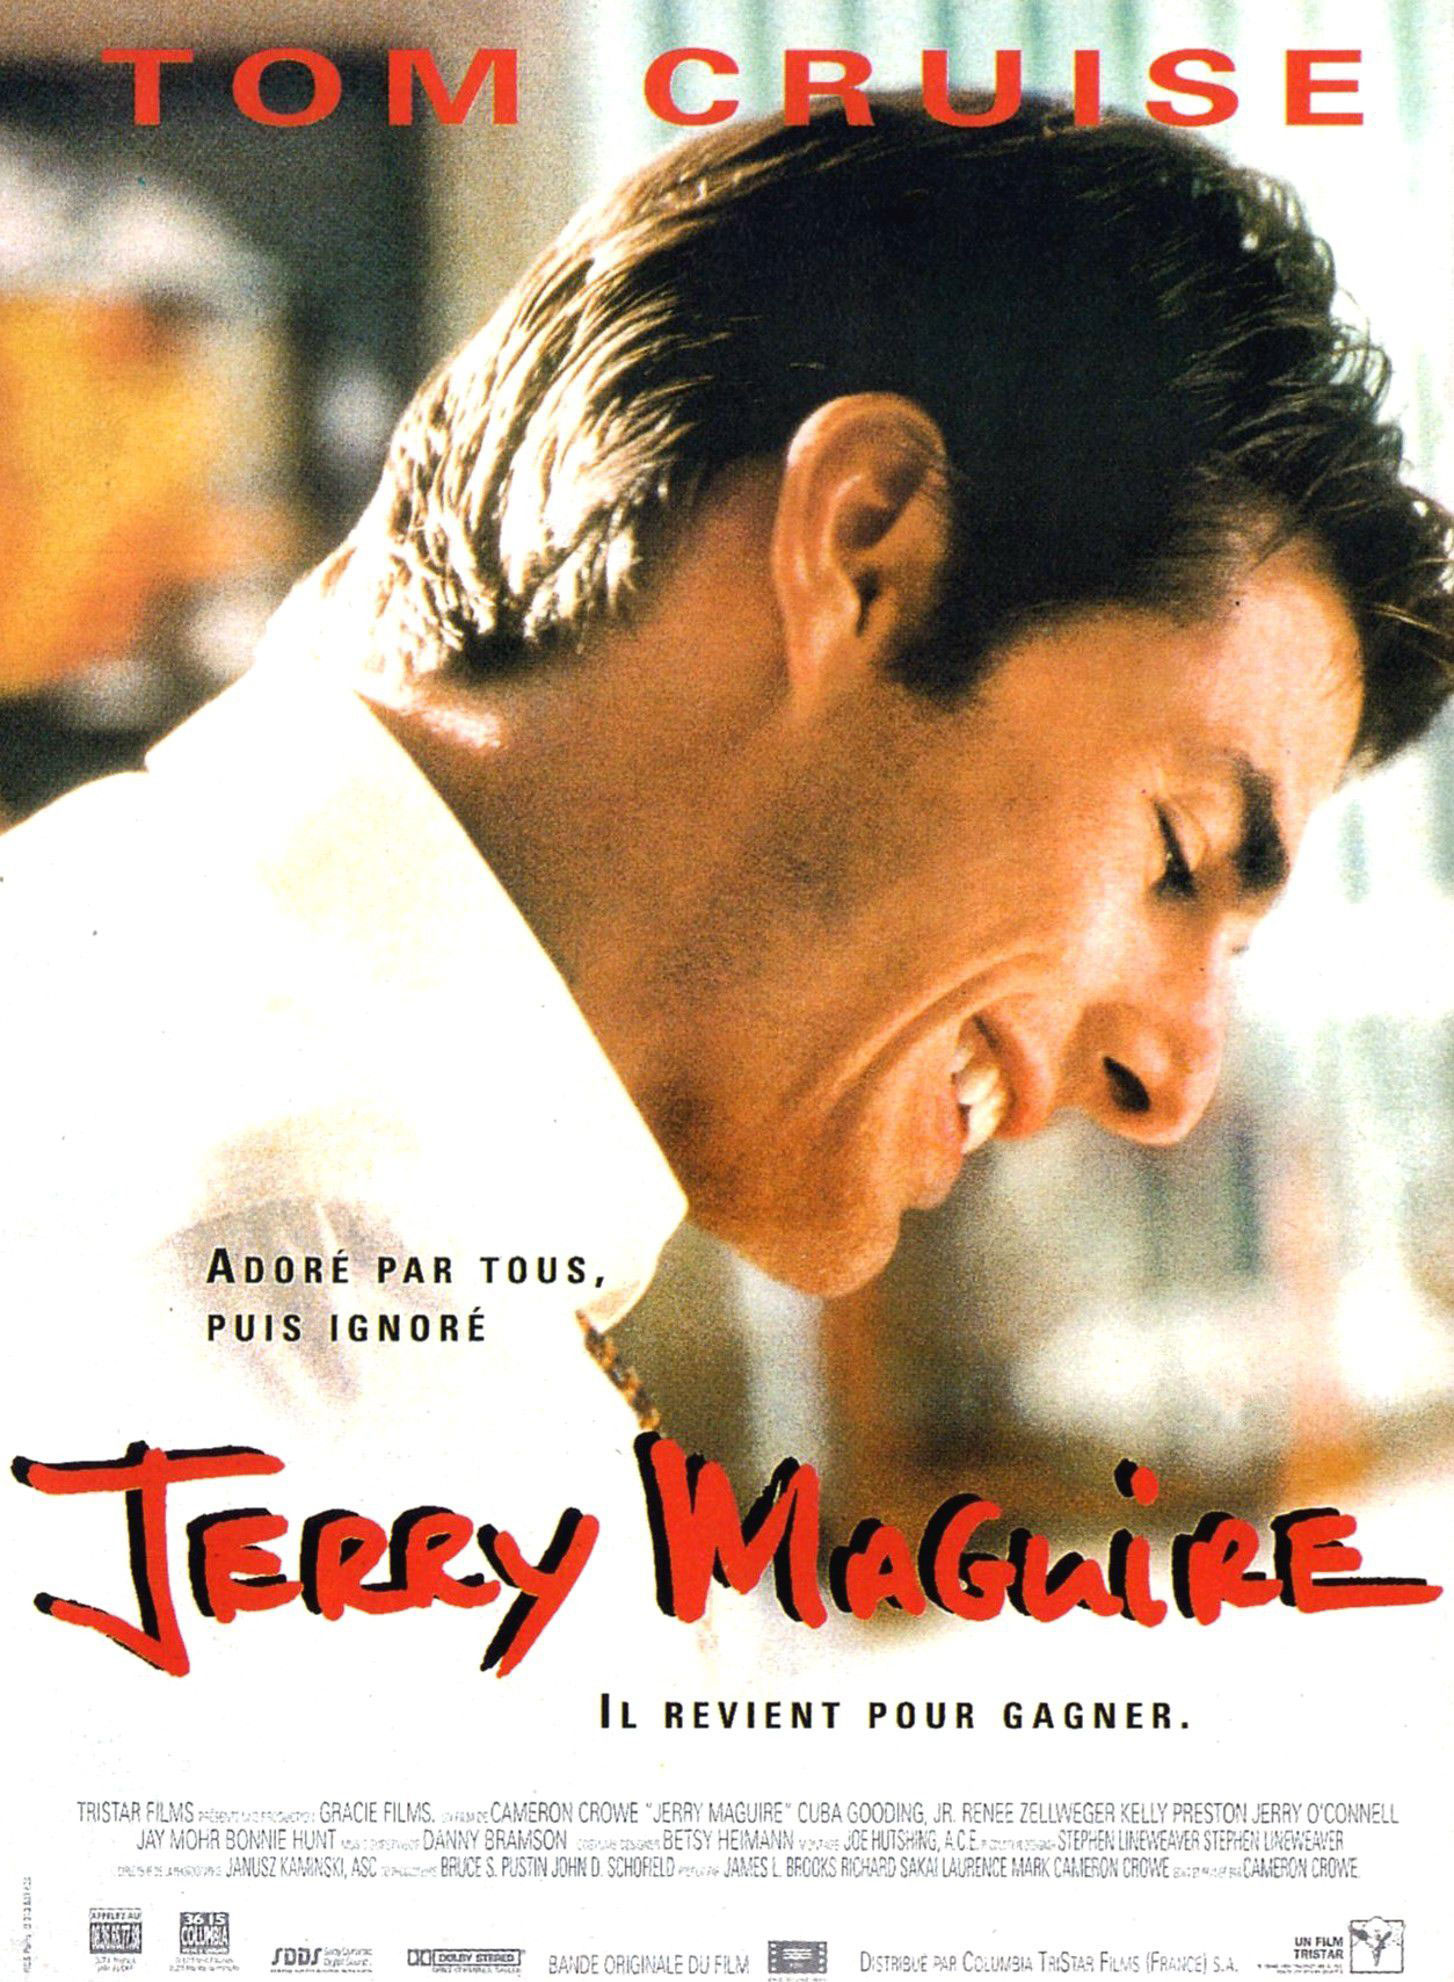 Jerry Maguire movie poster, in French!